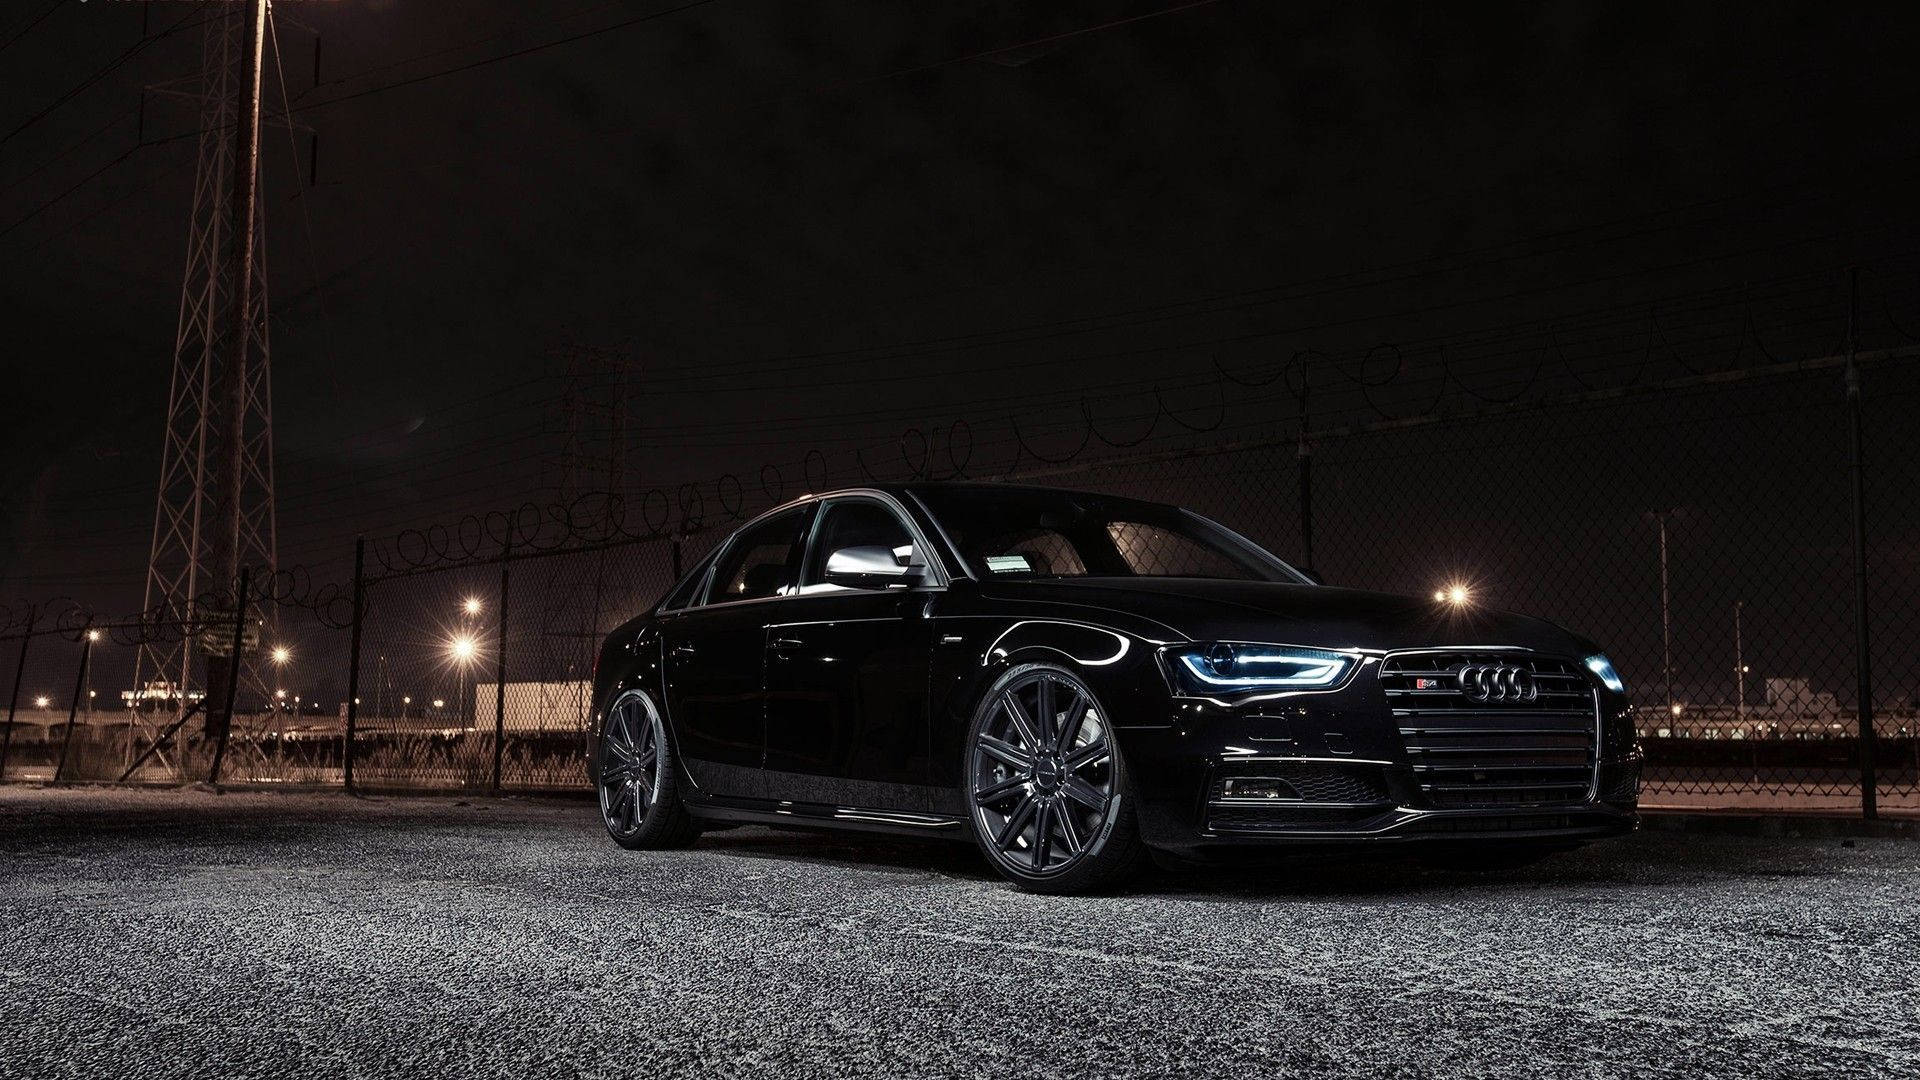 1920X1080 Audi Wallpaper and Background